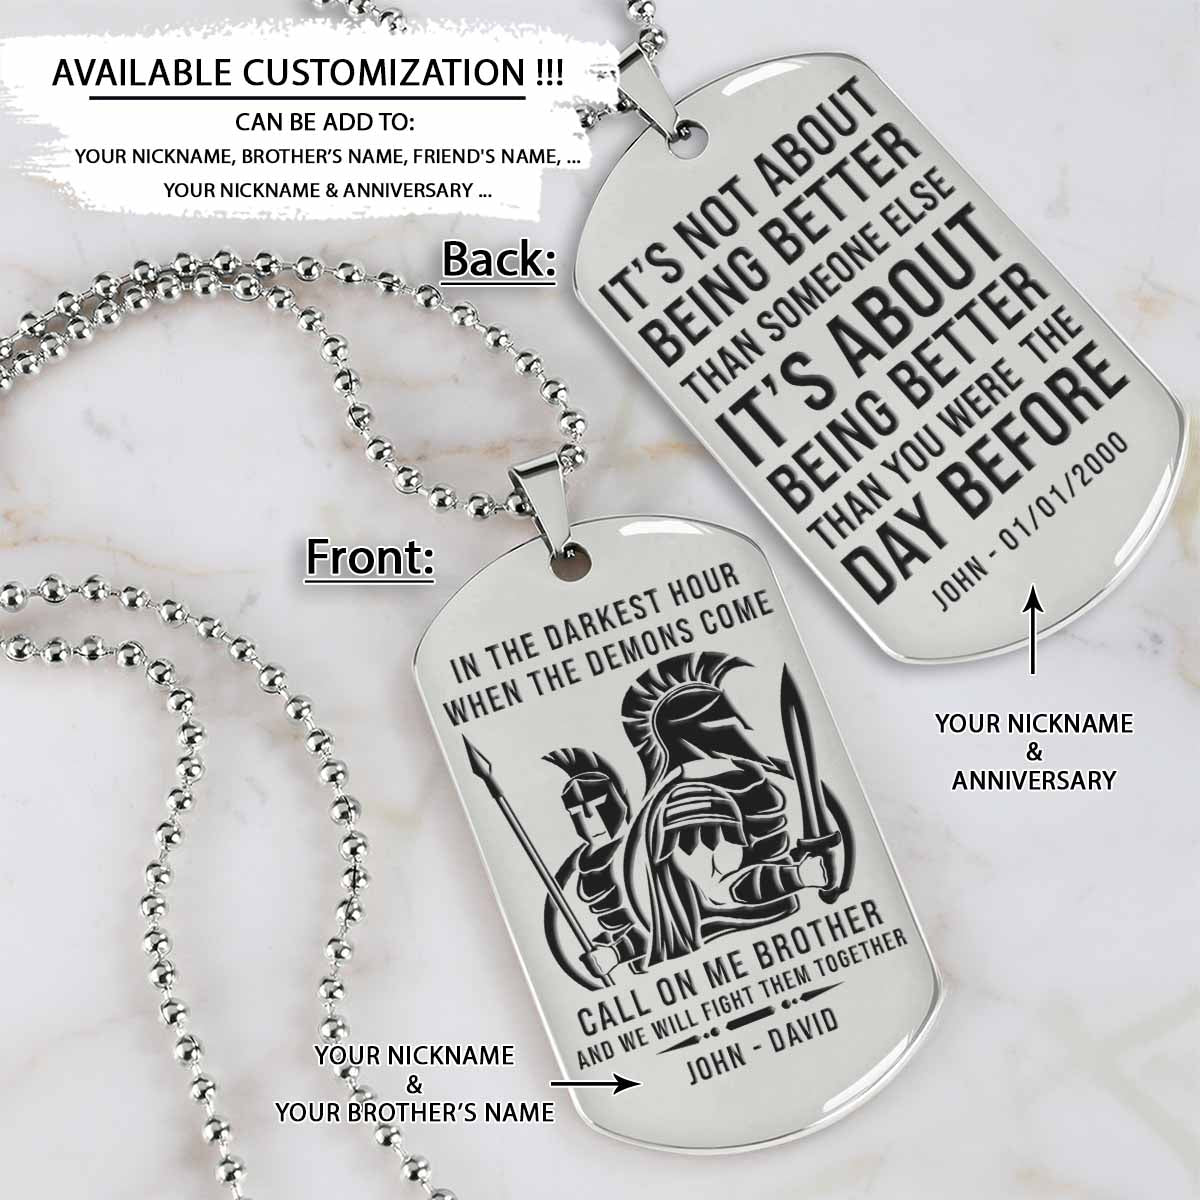 WAD064 - Call On Me Brother - It's Not About Being Better Than Someone Else - Warrior - Spartan Necklace - Engrave Silver Dog Tag